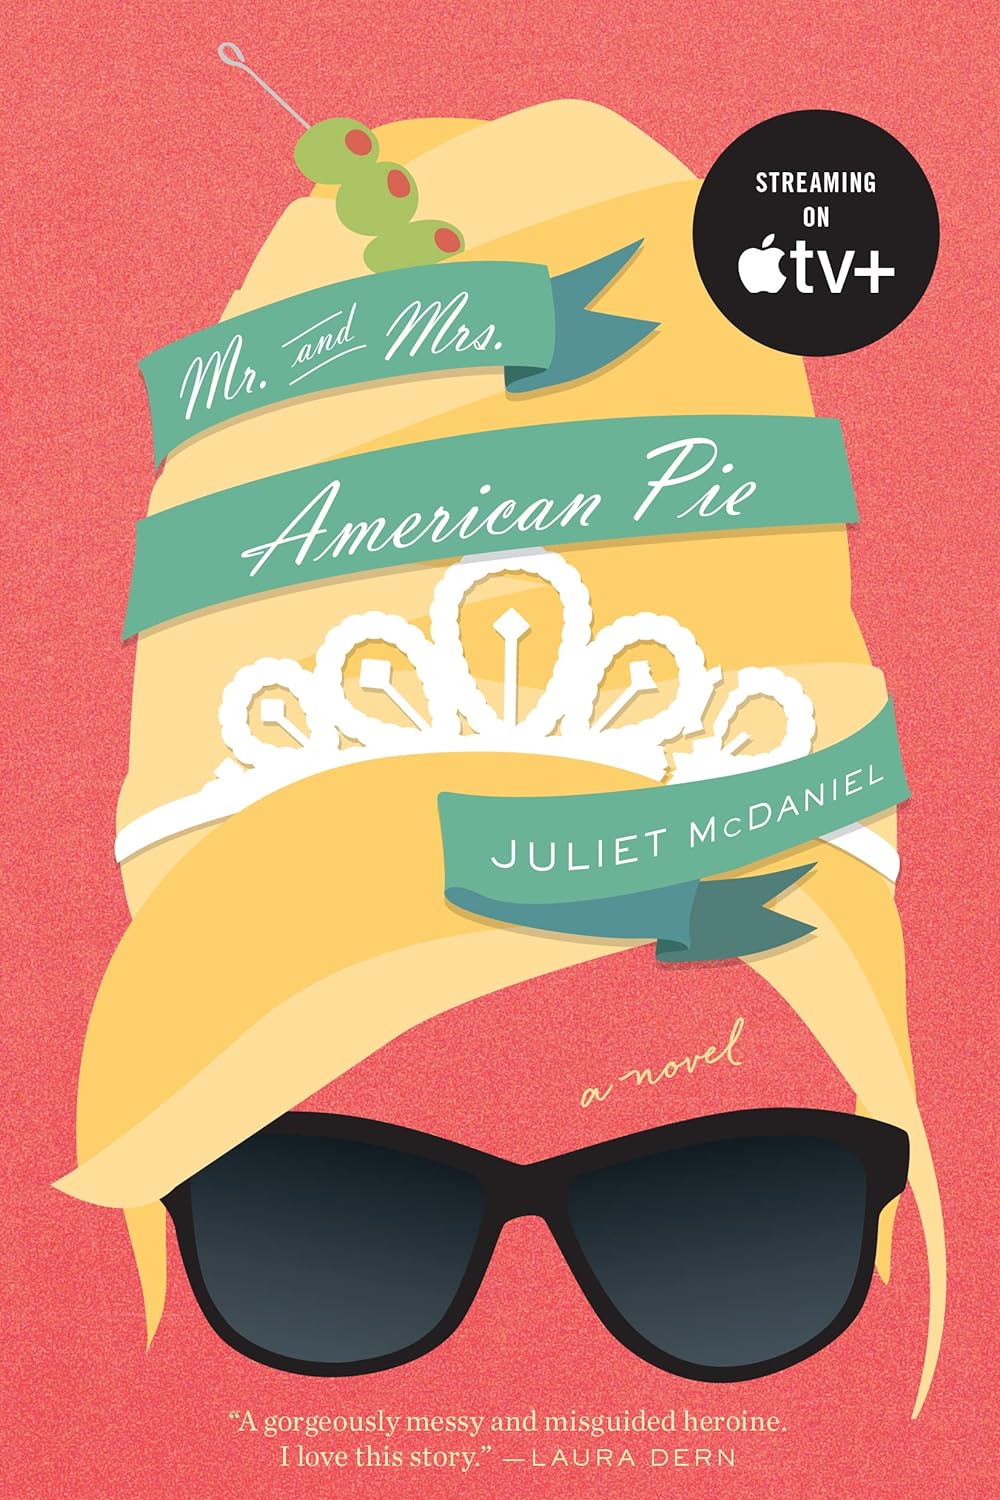 The cover of “Mr. and Mrs. American Pie” by Juliet McDaniel